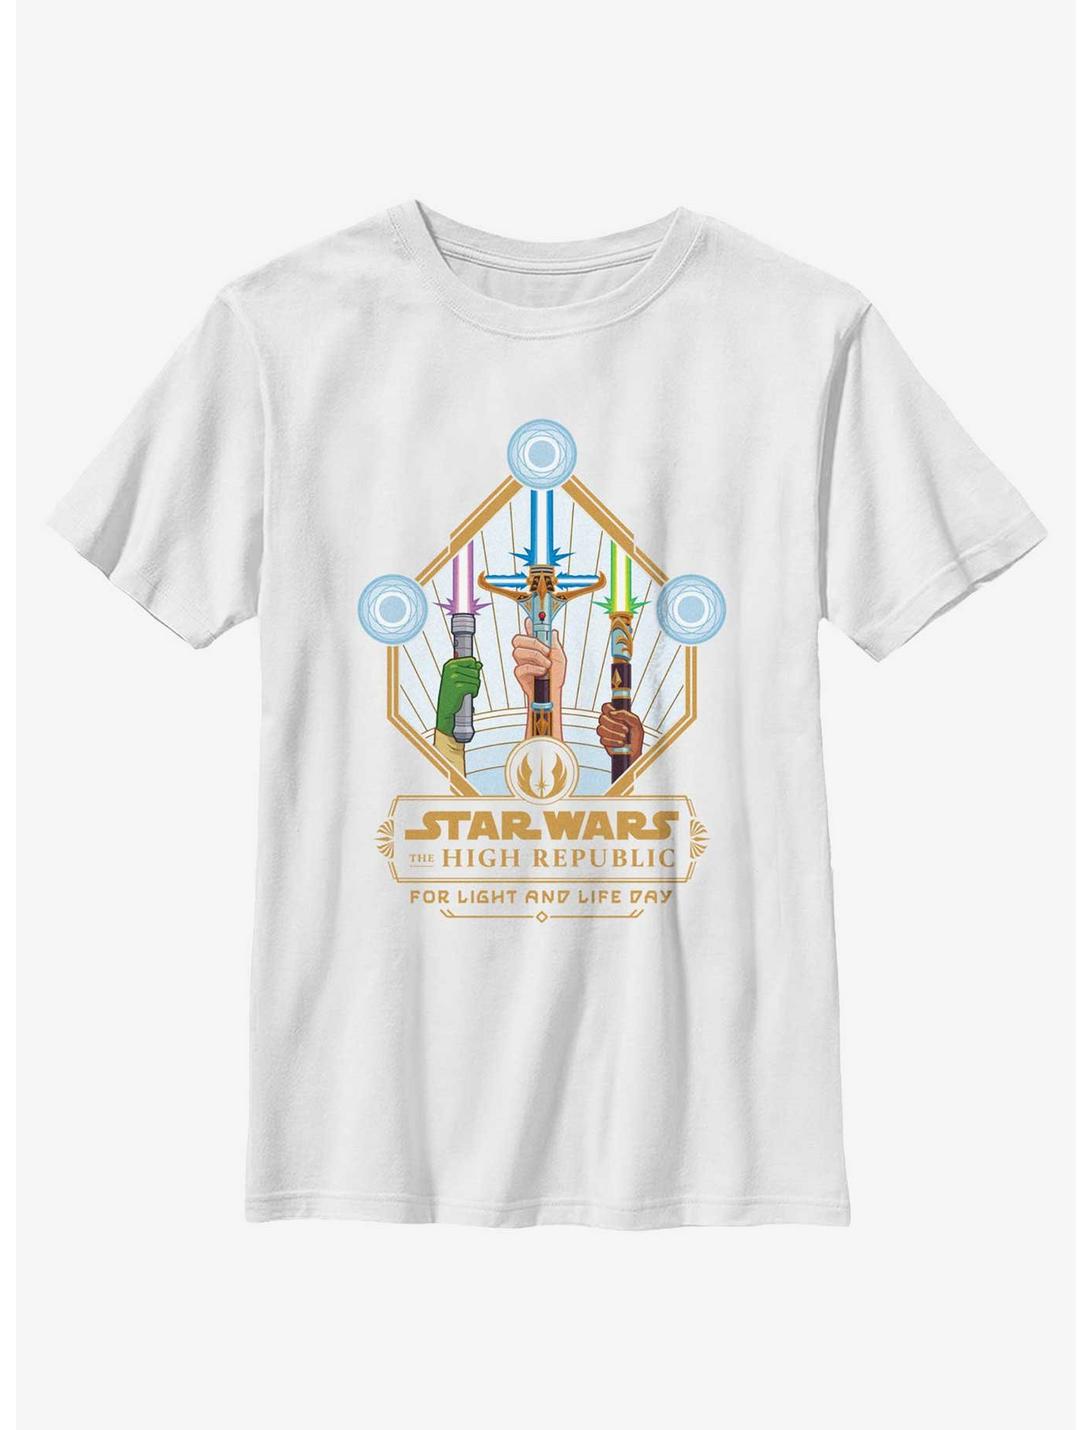 Star Wars Life Day Lightsaber Trio Badge Youth T-Shirt, WHITE, hi-res